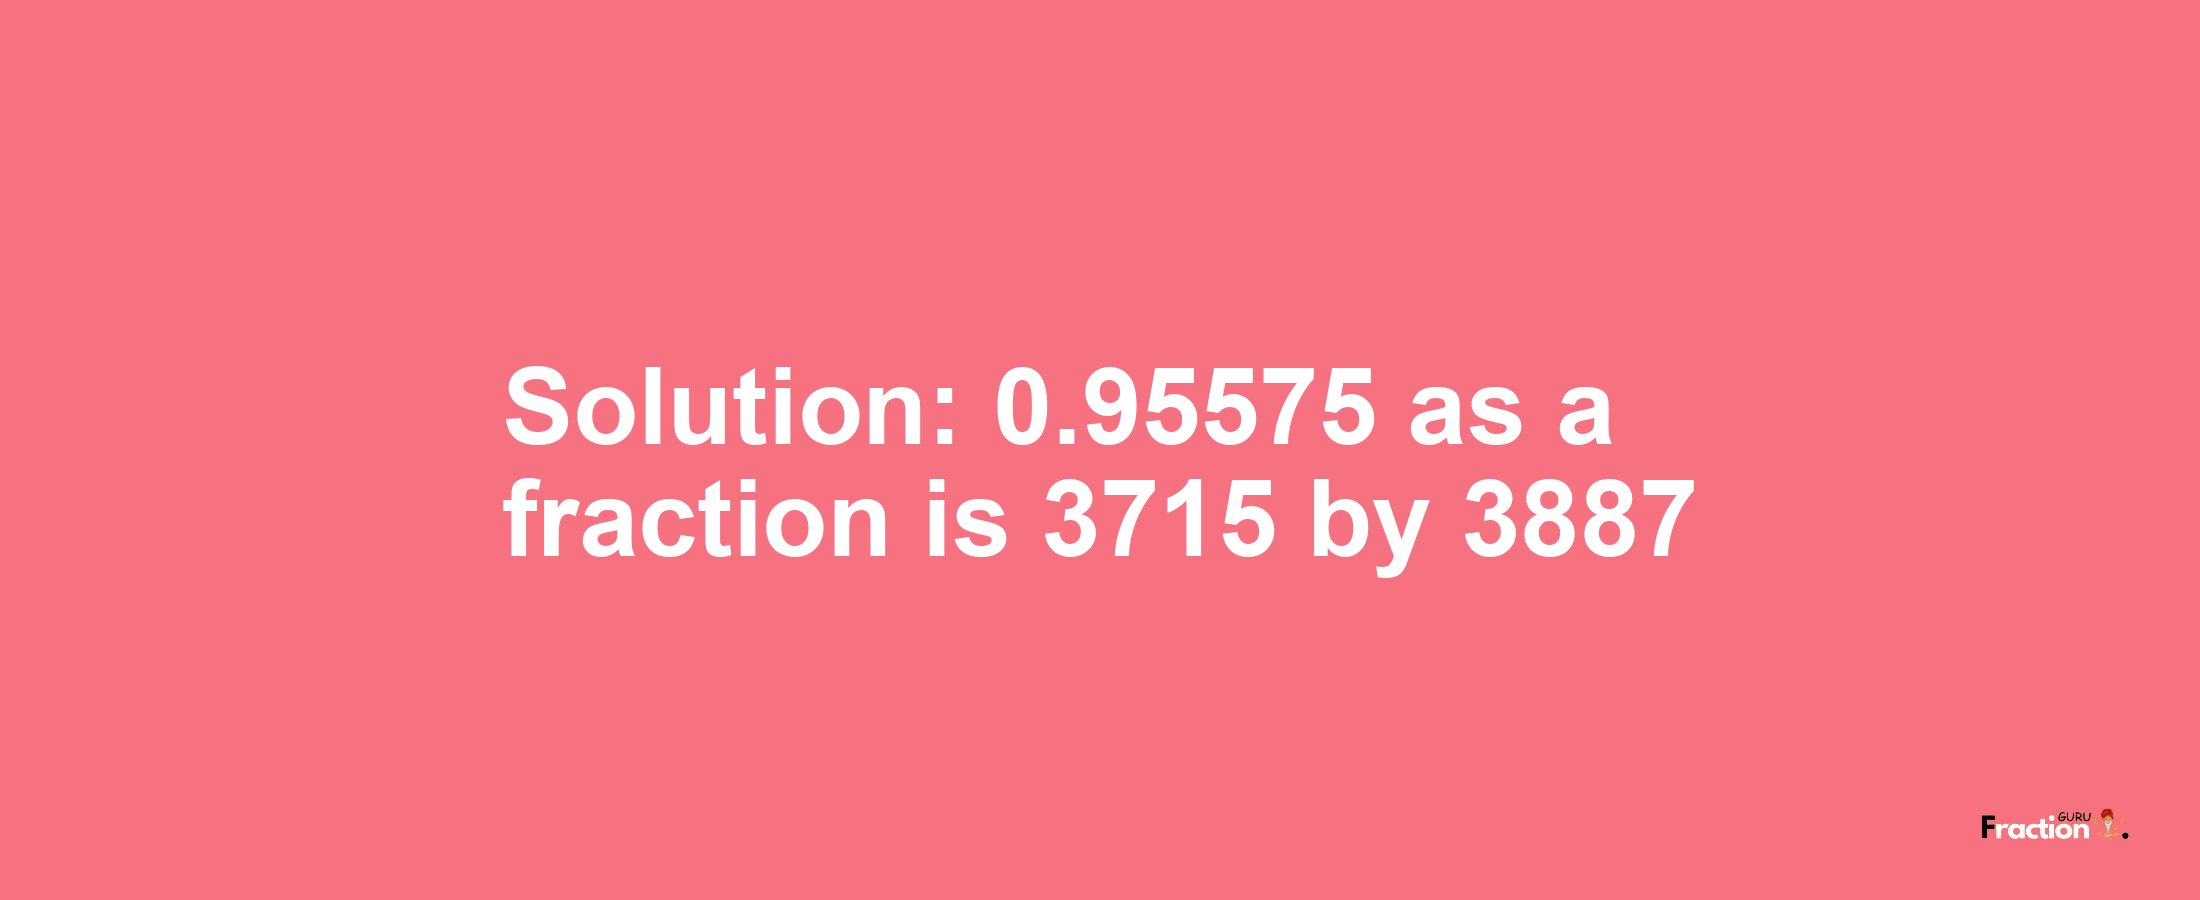 Solution:0.95575 as a fraction is 3715/3887